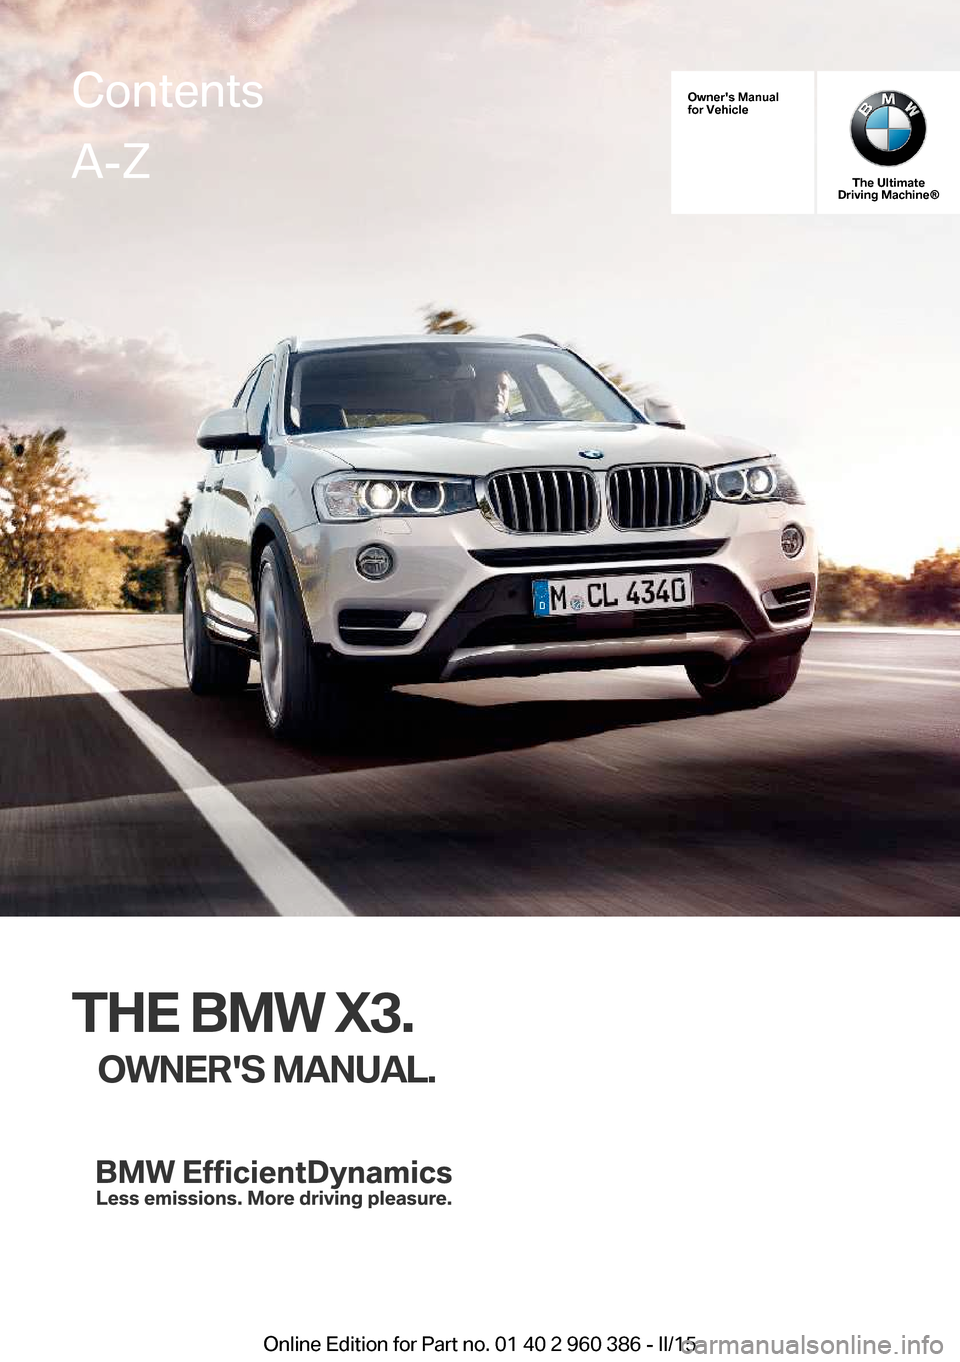 BMW X3 2016 F25 Owners Manual Owners Manual
for Vehicle
The Ultimate
Driving Machine®
THE BMW X3.
OWNERS MANUAL.
ContentsA-Z
Online Edition for Part no. 01 40 2 960 386 - II/15   